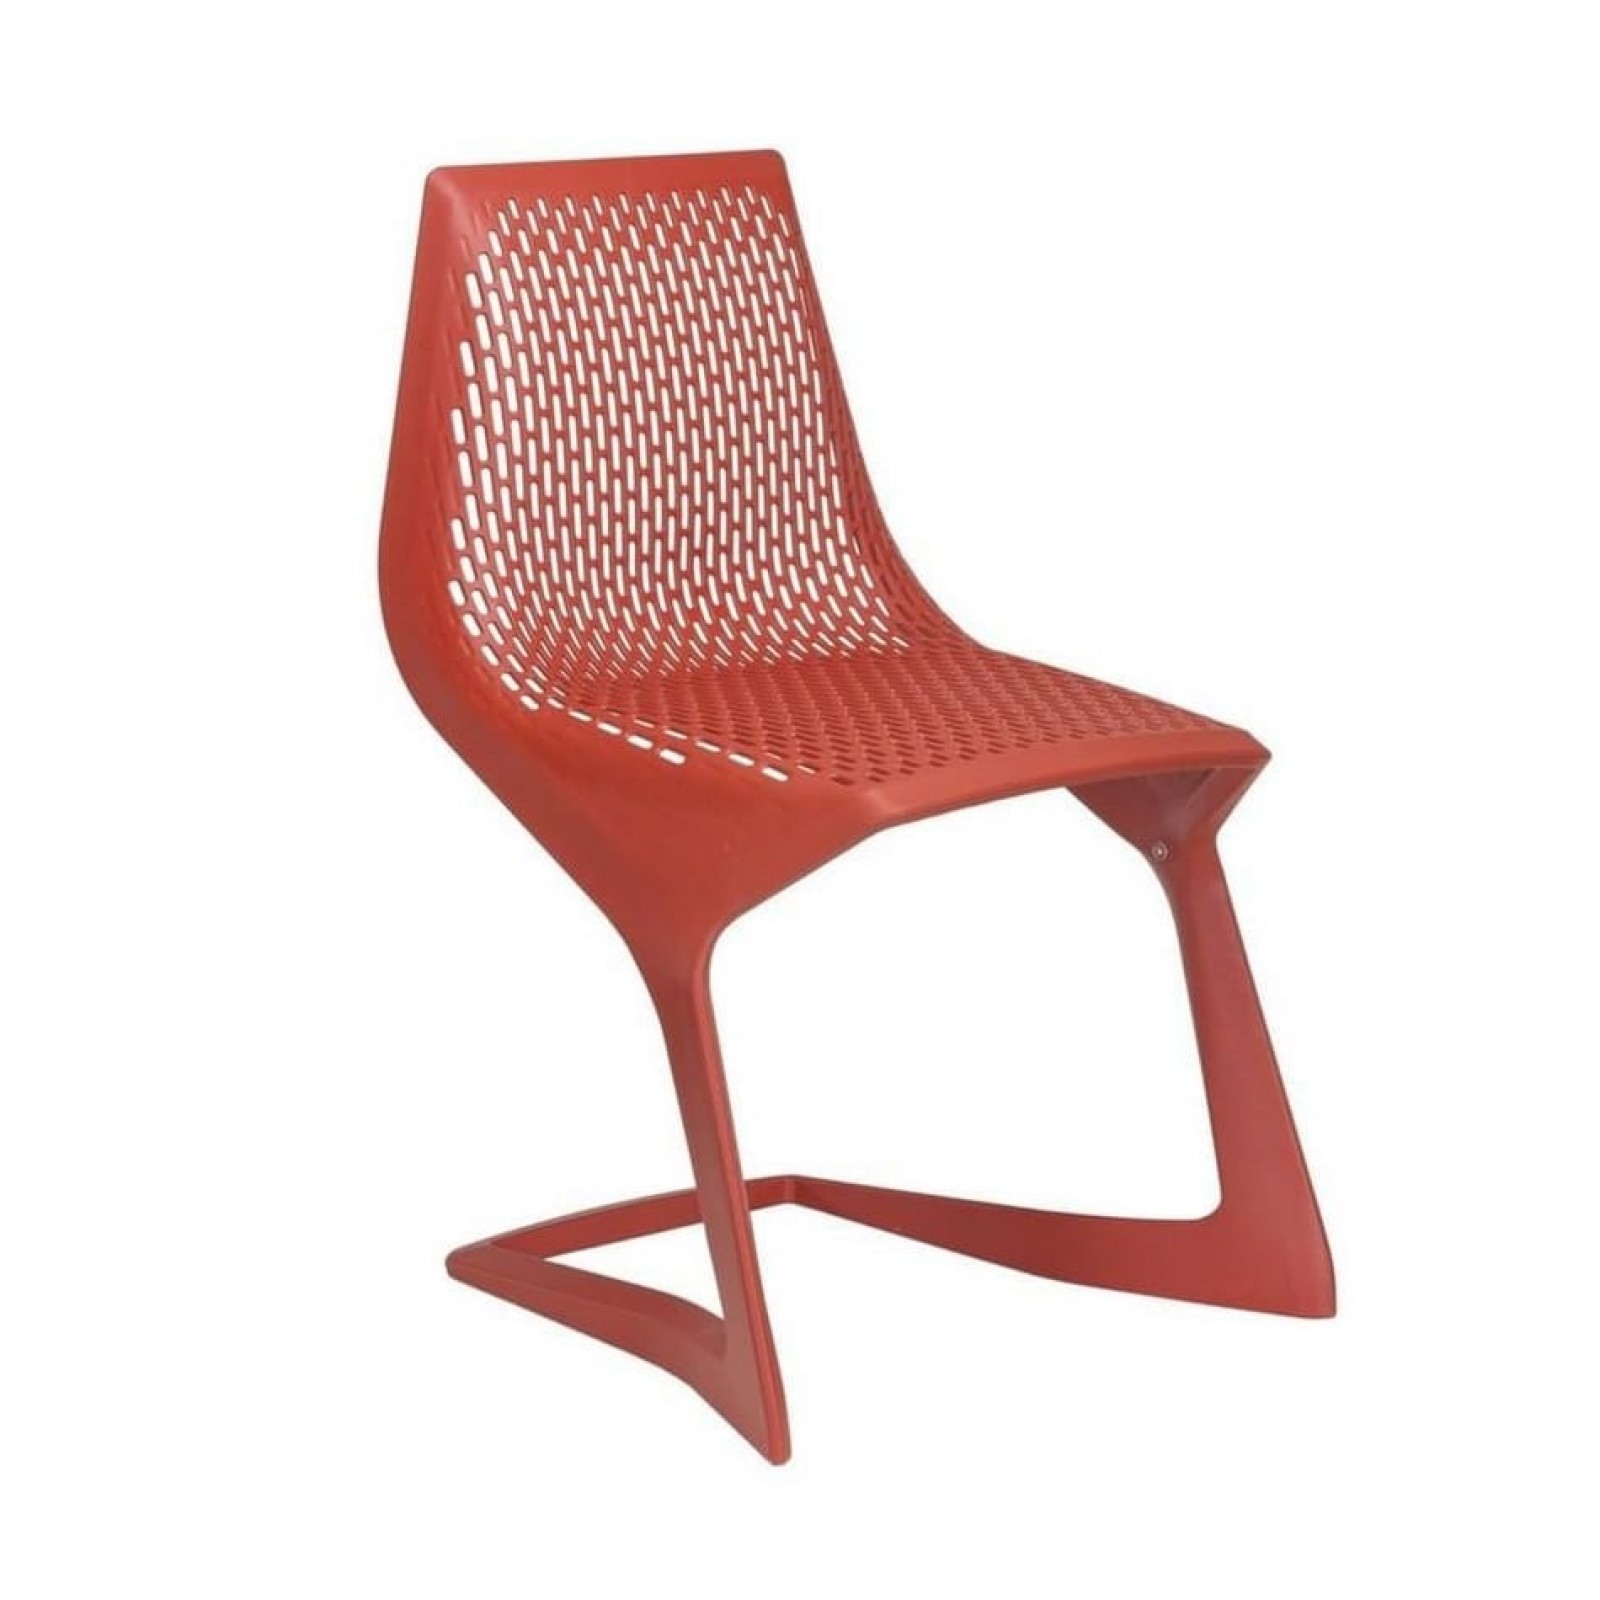 PLANK Myto Chair Traffic Red | Design Is This